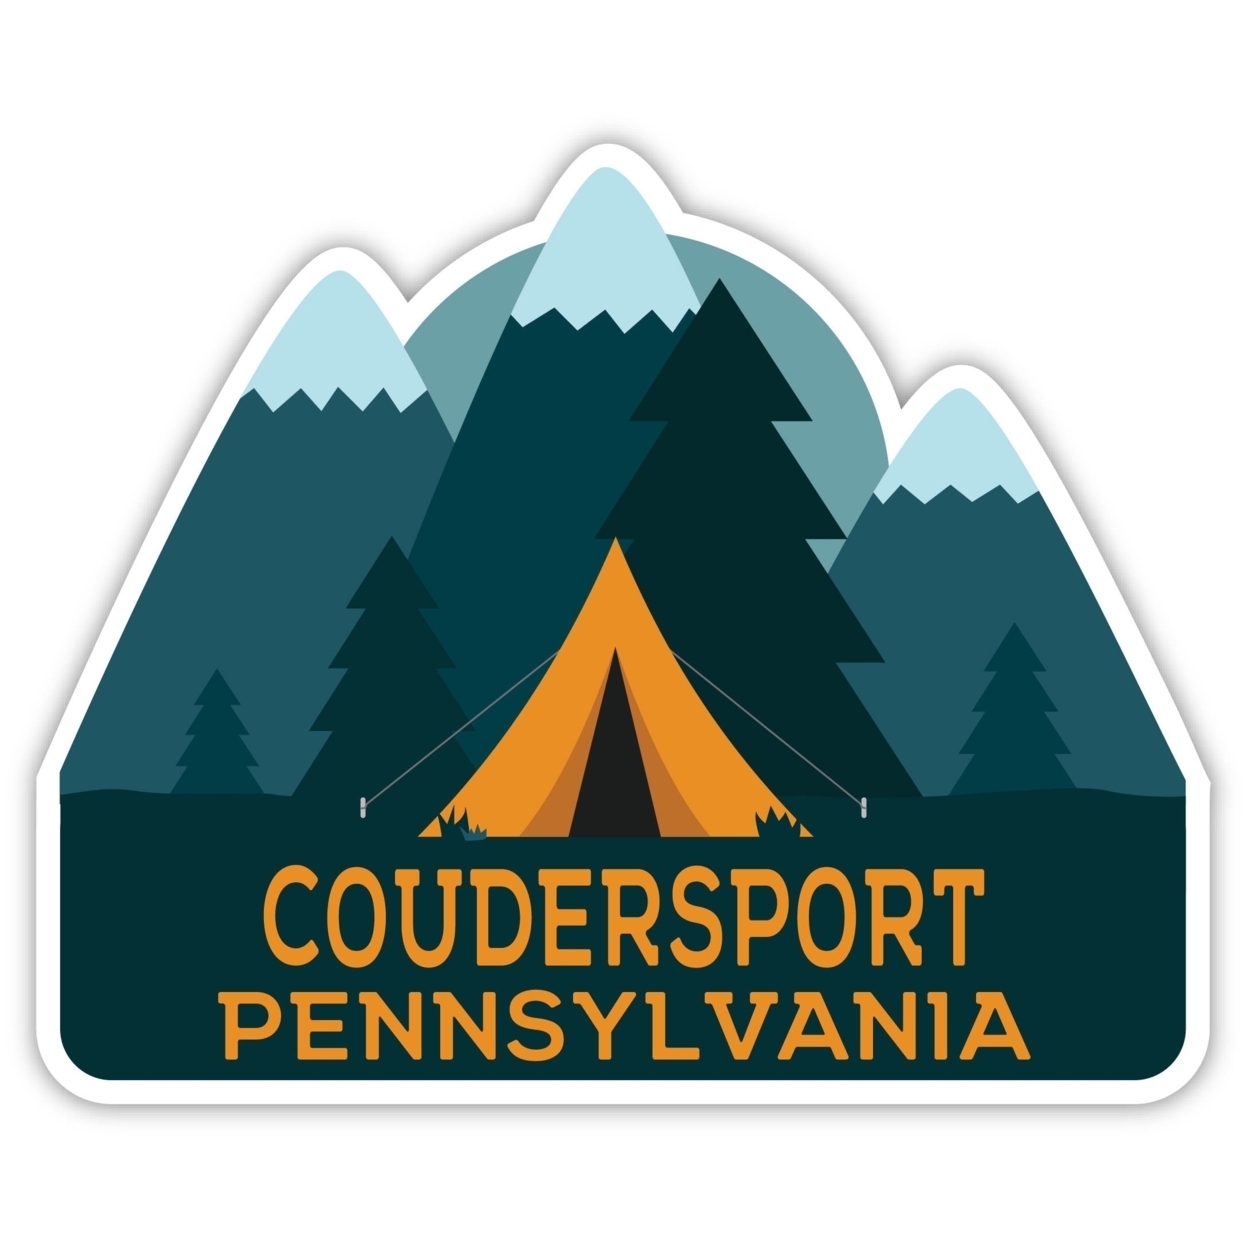 Coudersport Pennsylvania Souvenir Decorative Stickers (Choose Theme And Size) - Single Unit, 4-Inch, Great Outdoors